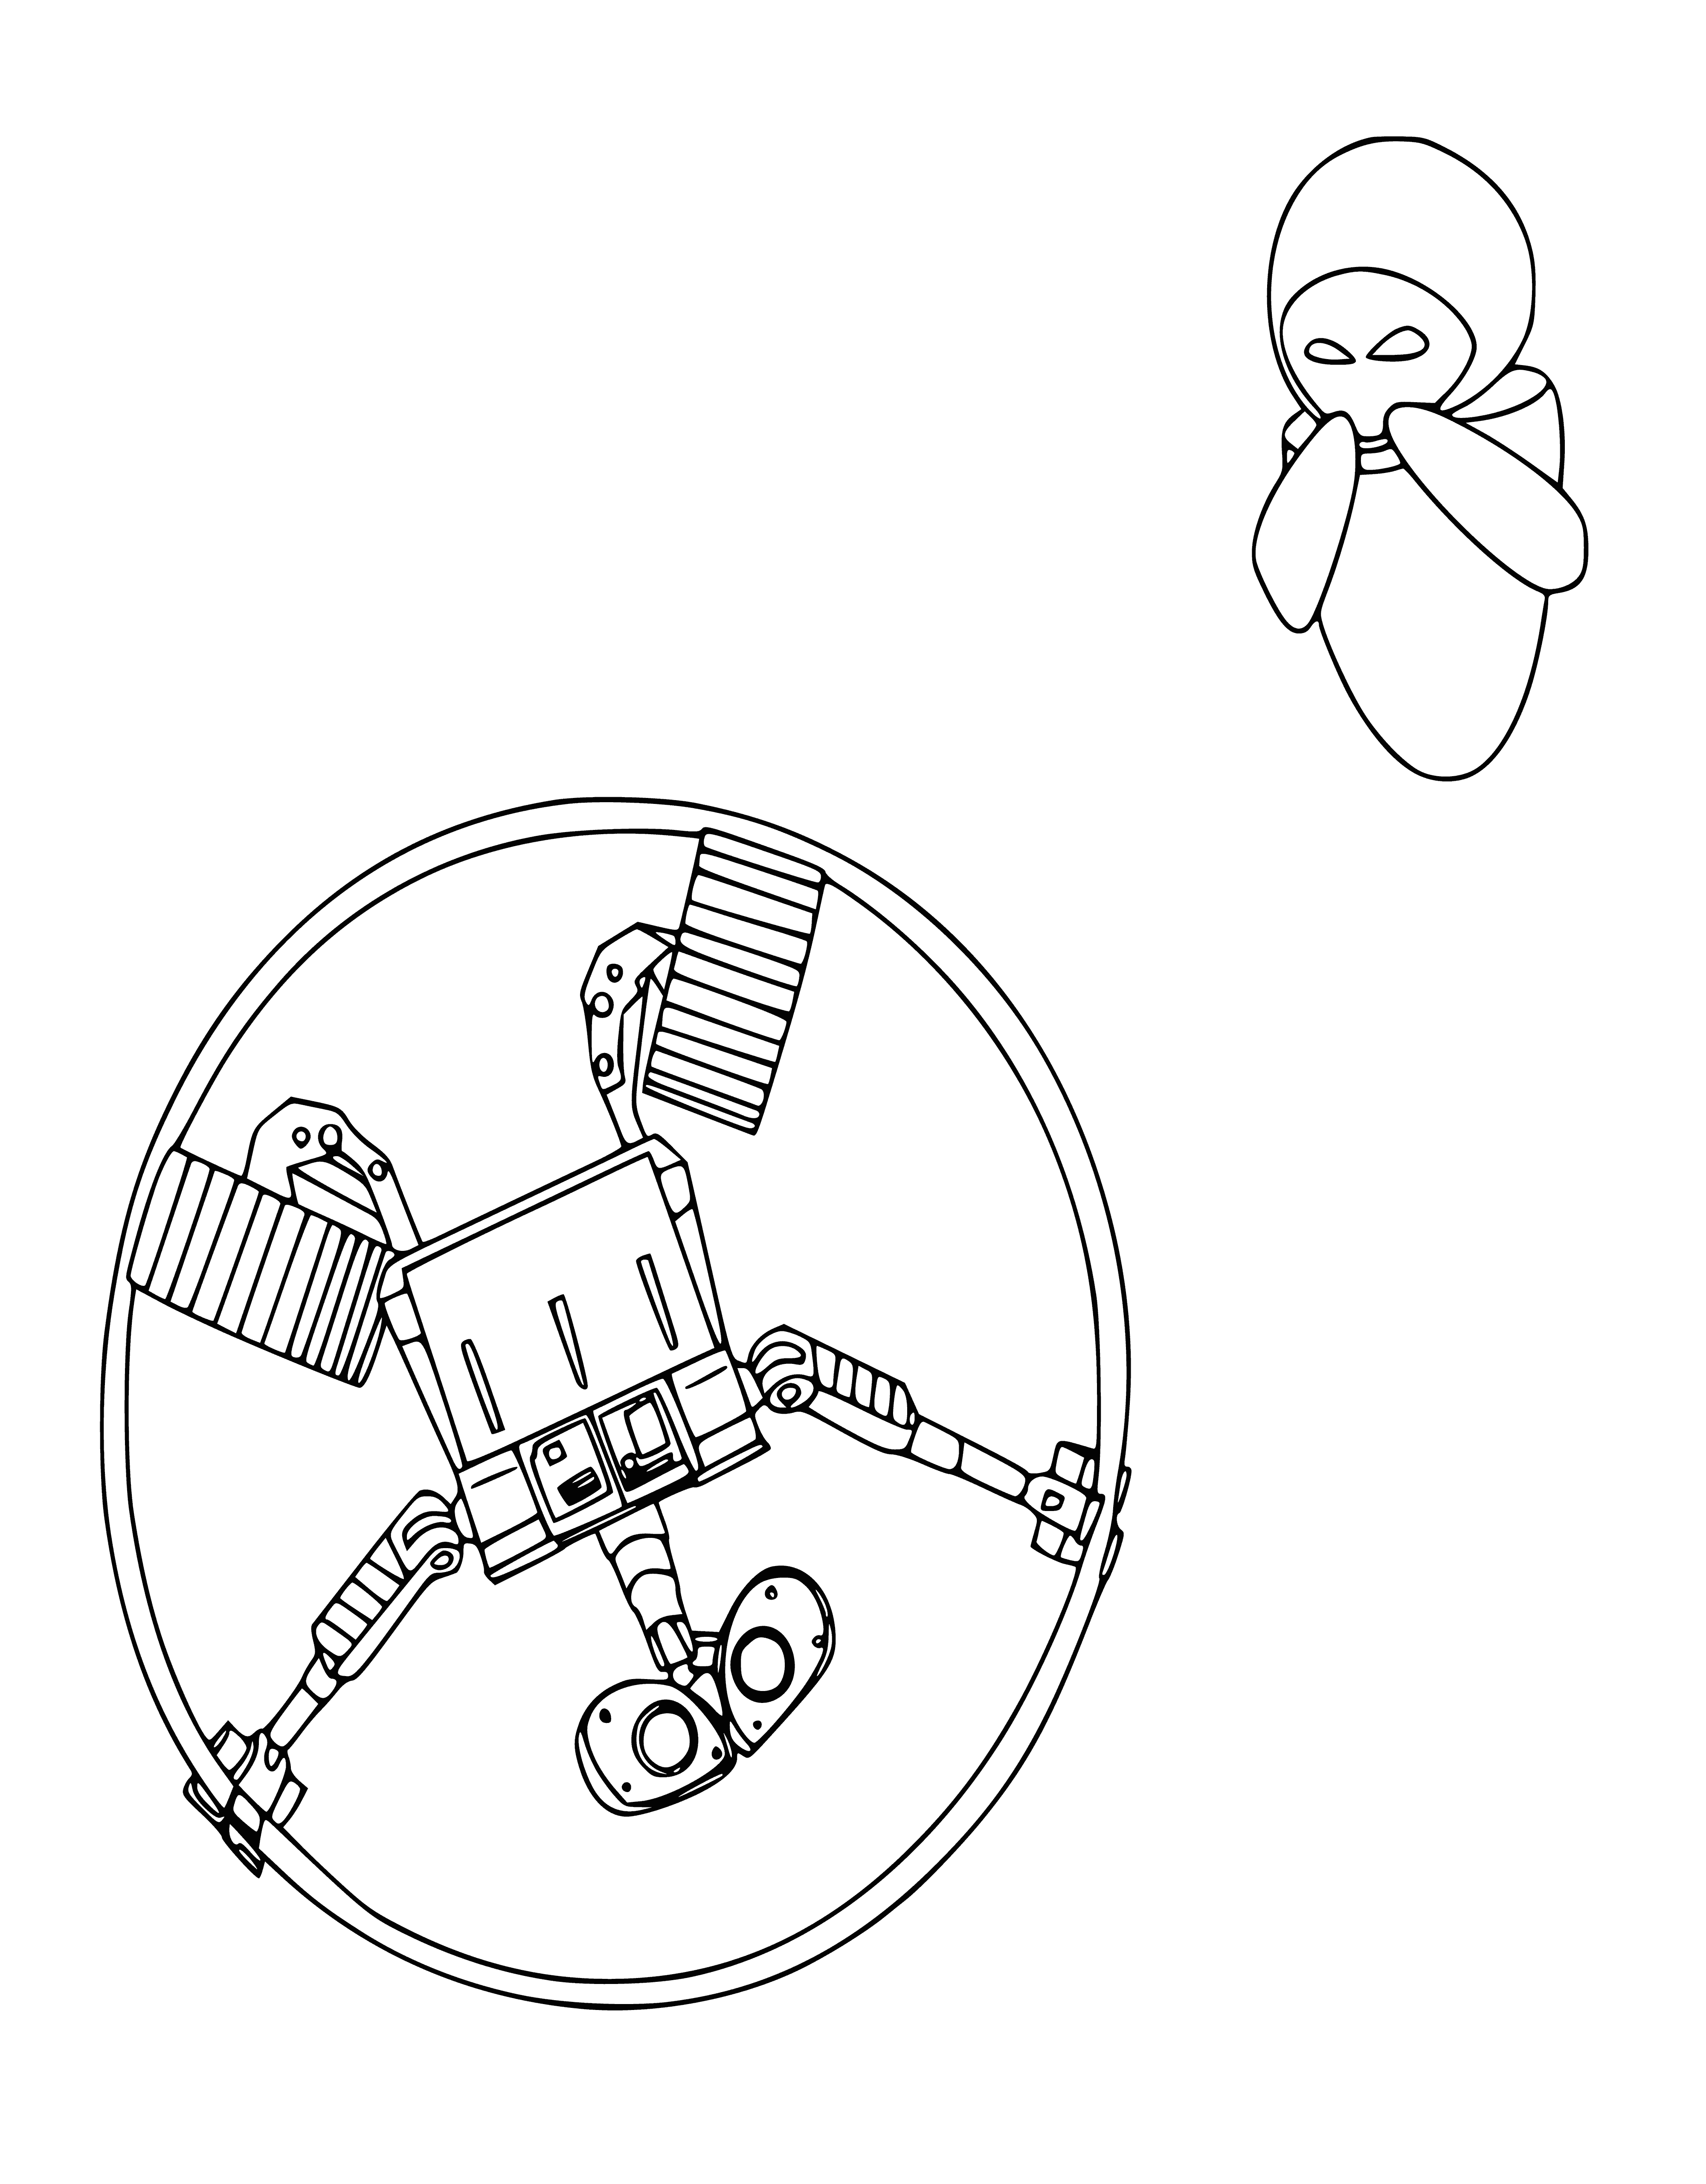 coloring page: Robotic creature sits on a hill, holding something in its hands; next to it is a round object. #robotics #AI